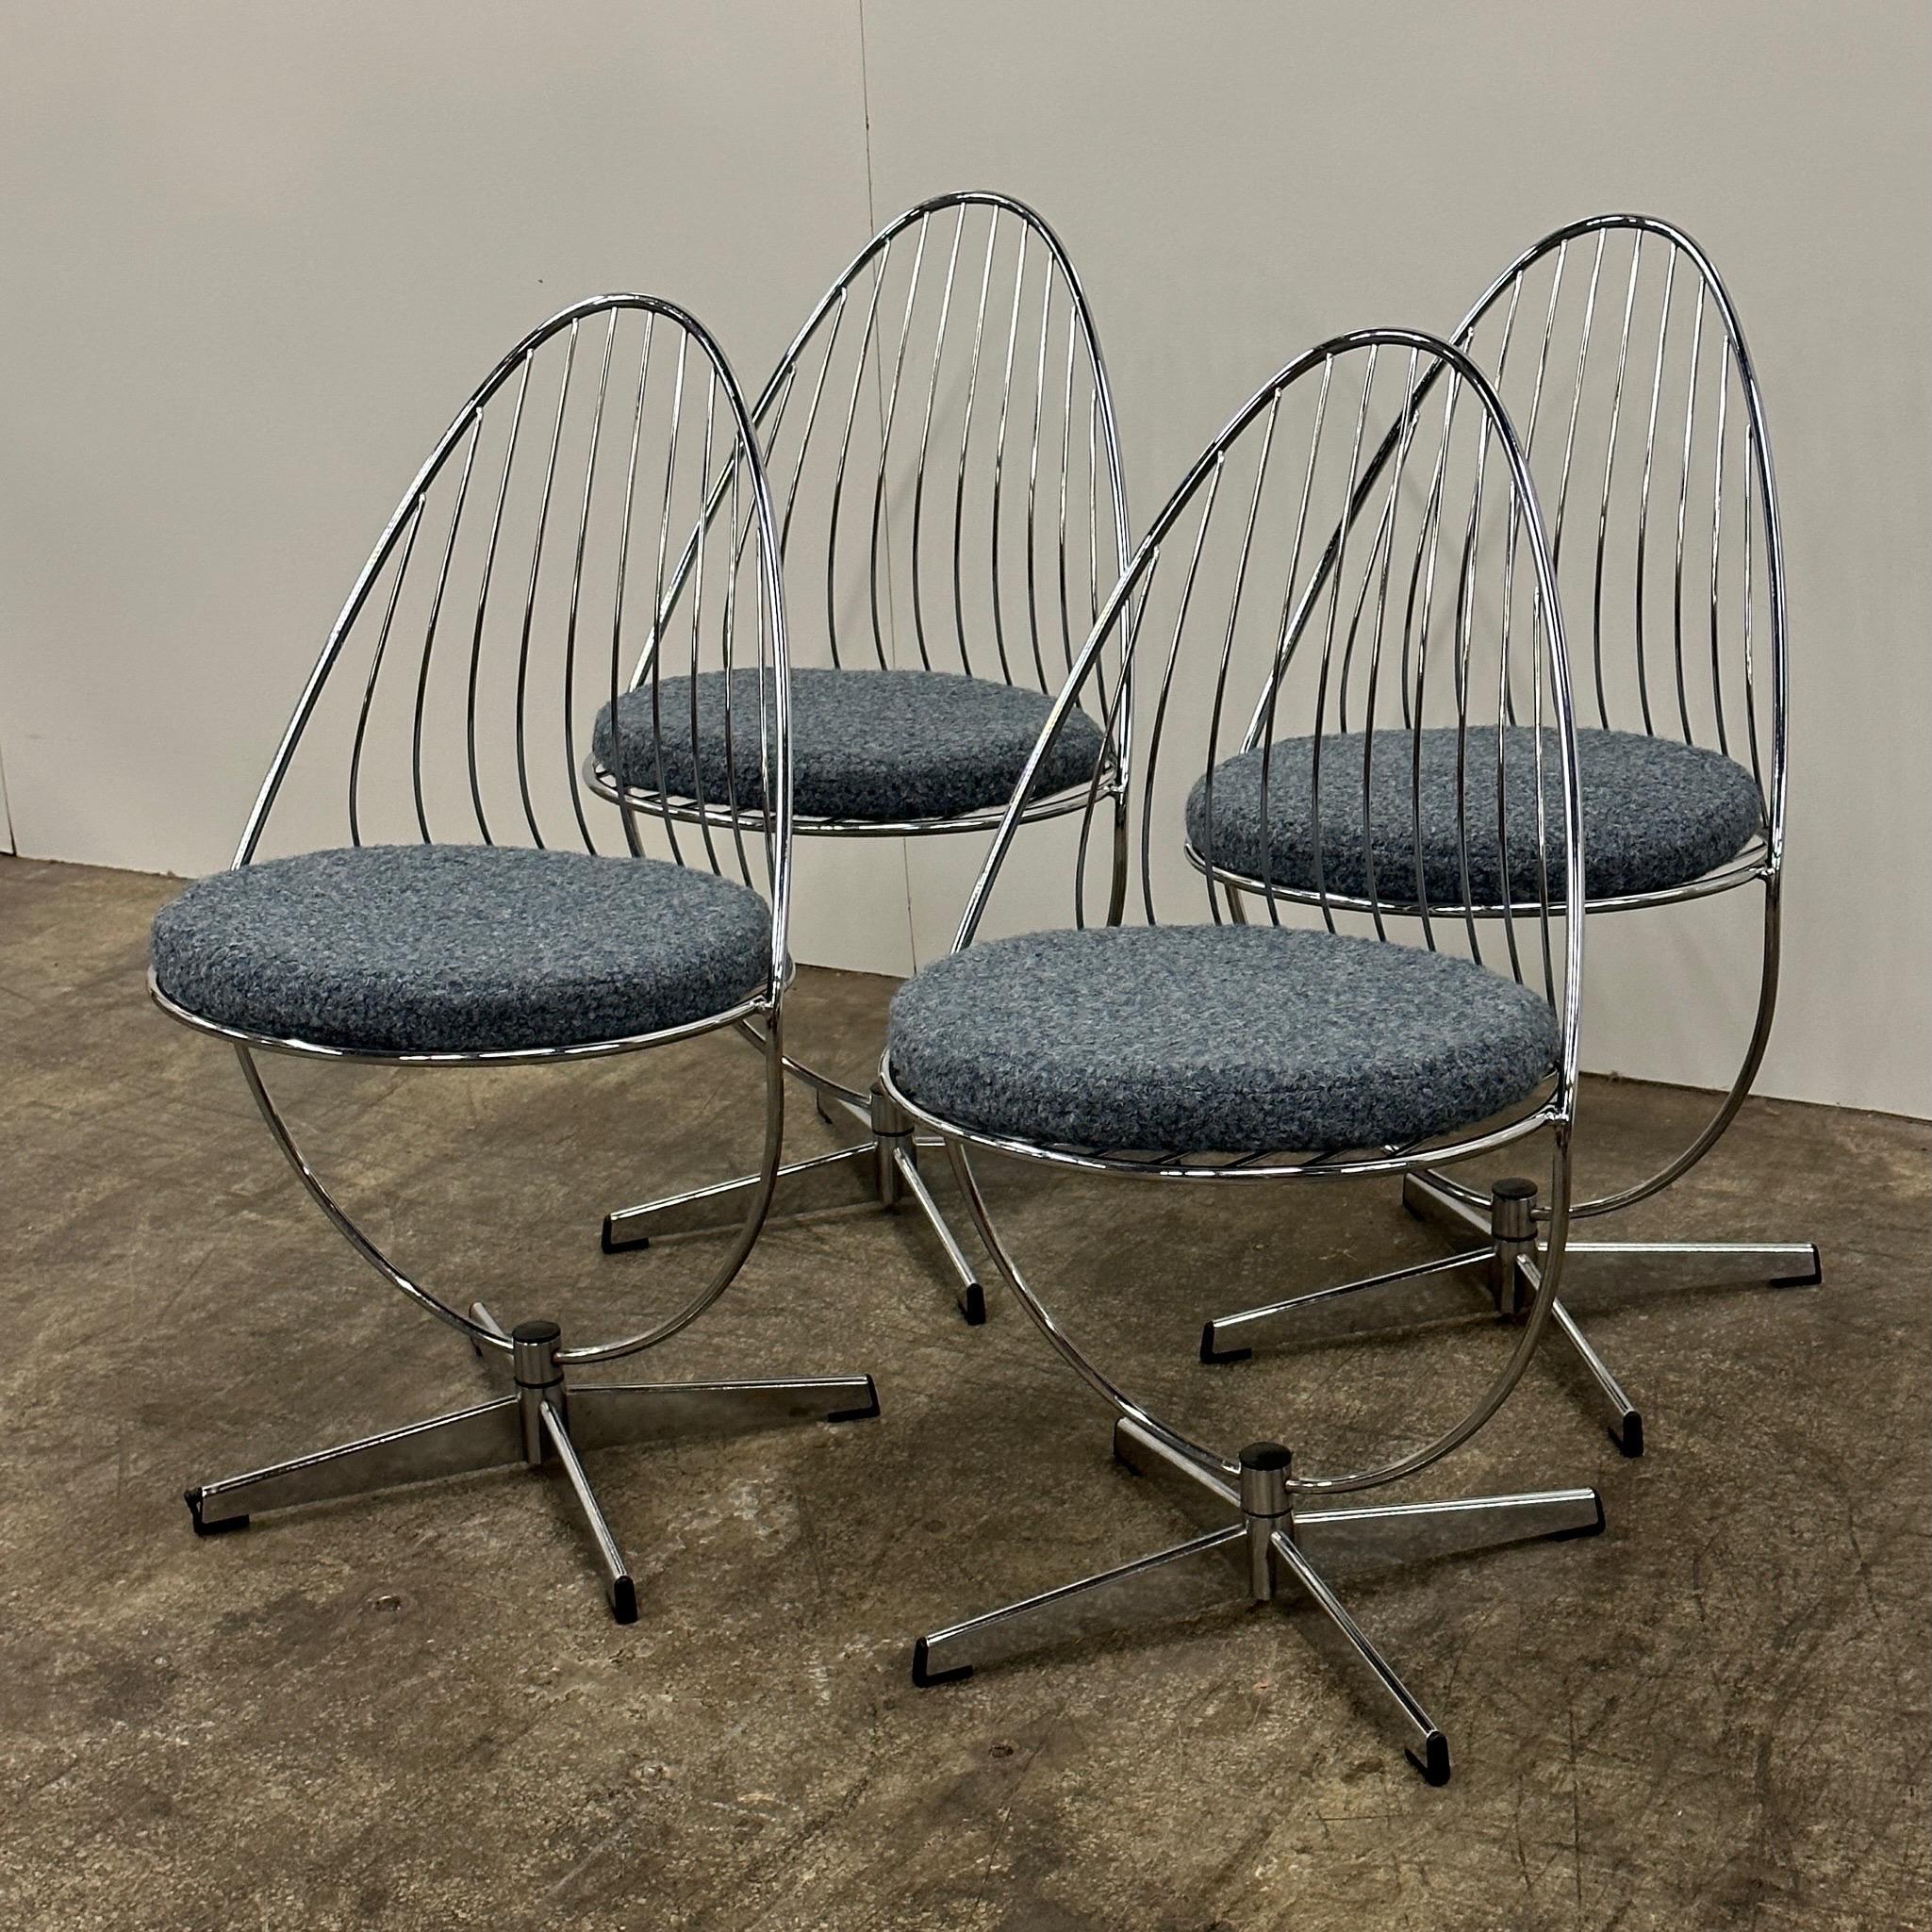 c. 1960s. Chrome egg chairs with seat pad upholstered in lambchop boucle. Attributed to Dahlens Dalum of Sweden. 